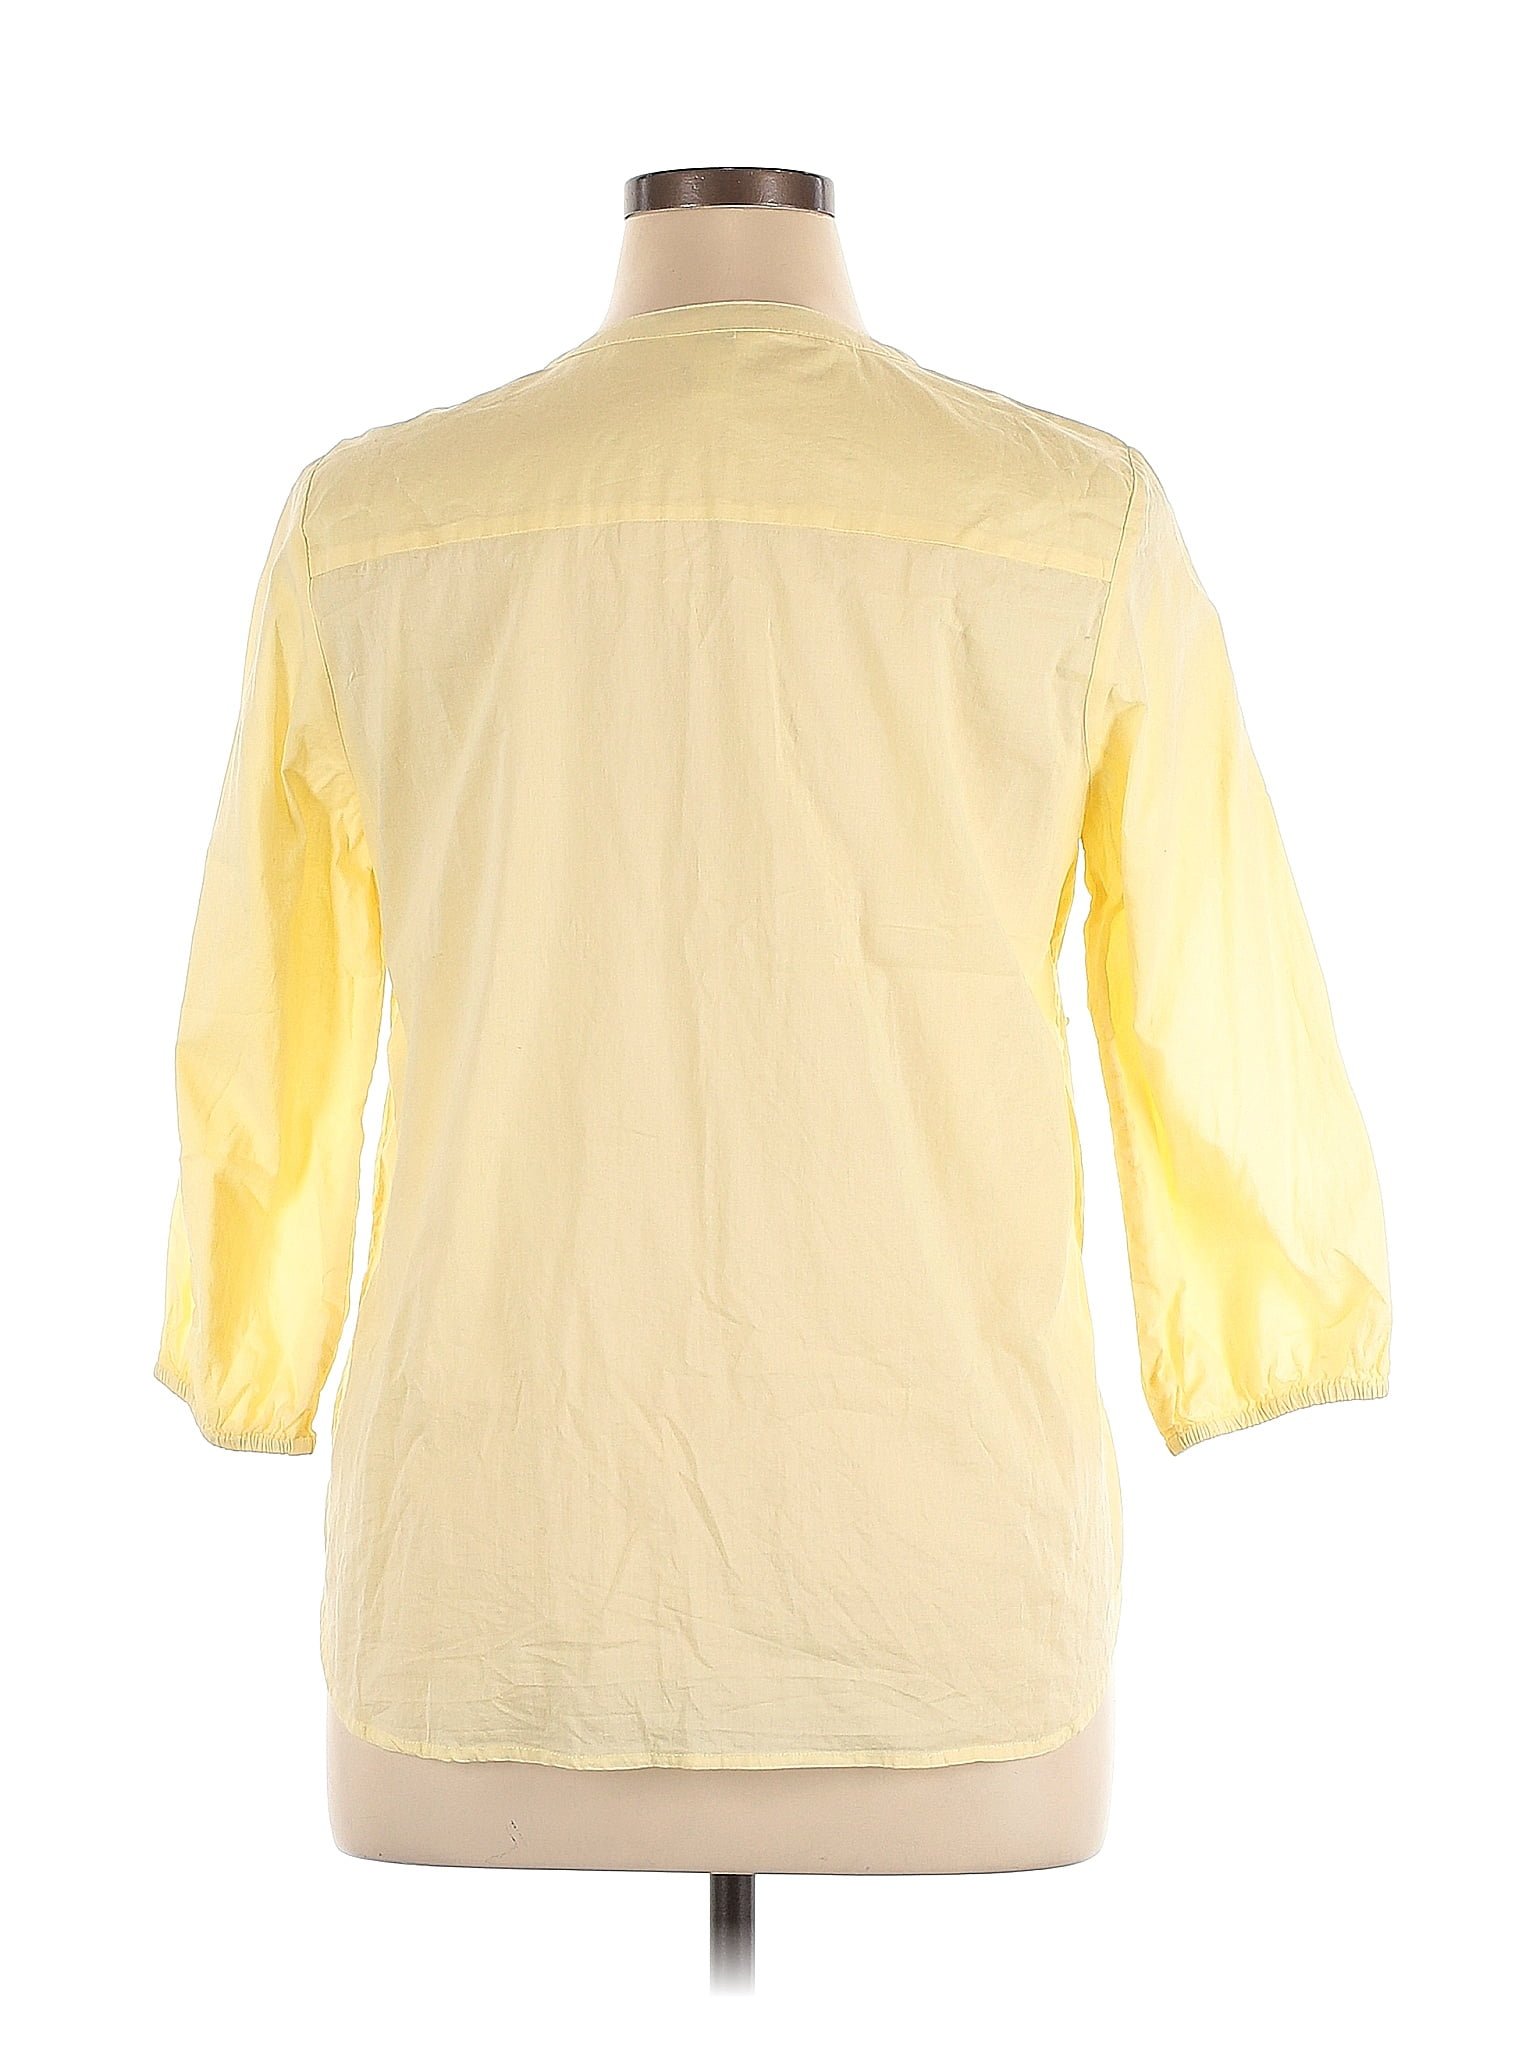 Intro 100% Cotton Floral Yellow Long Sleeve Blouse Size XL (Petite